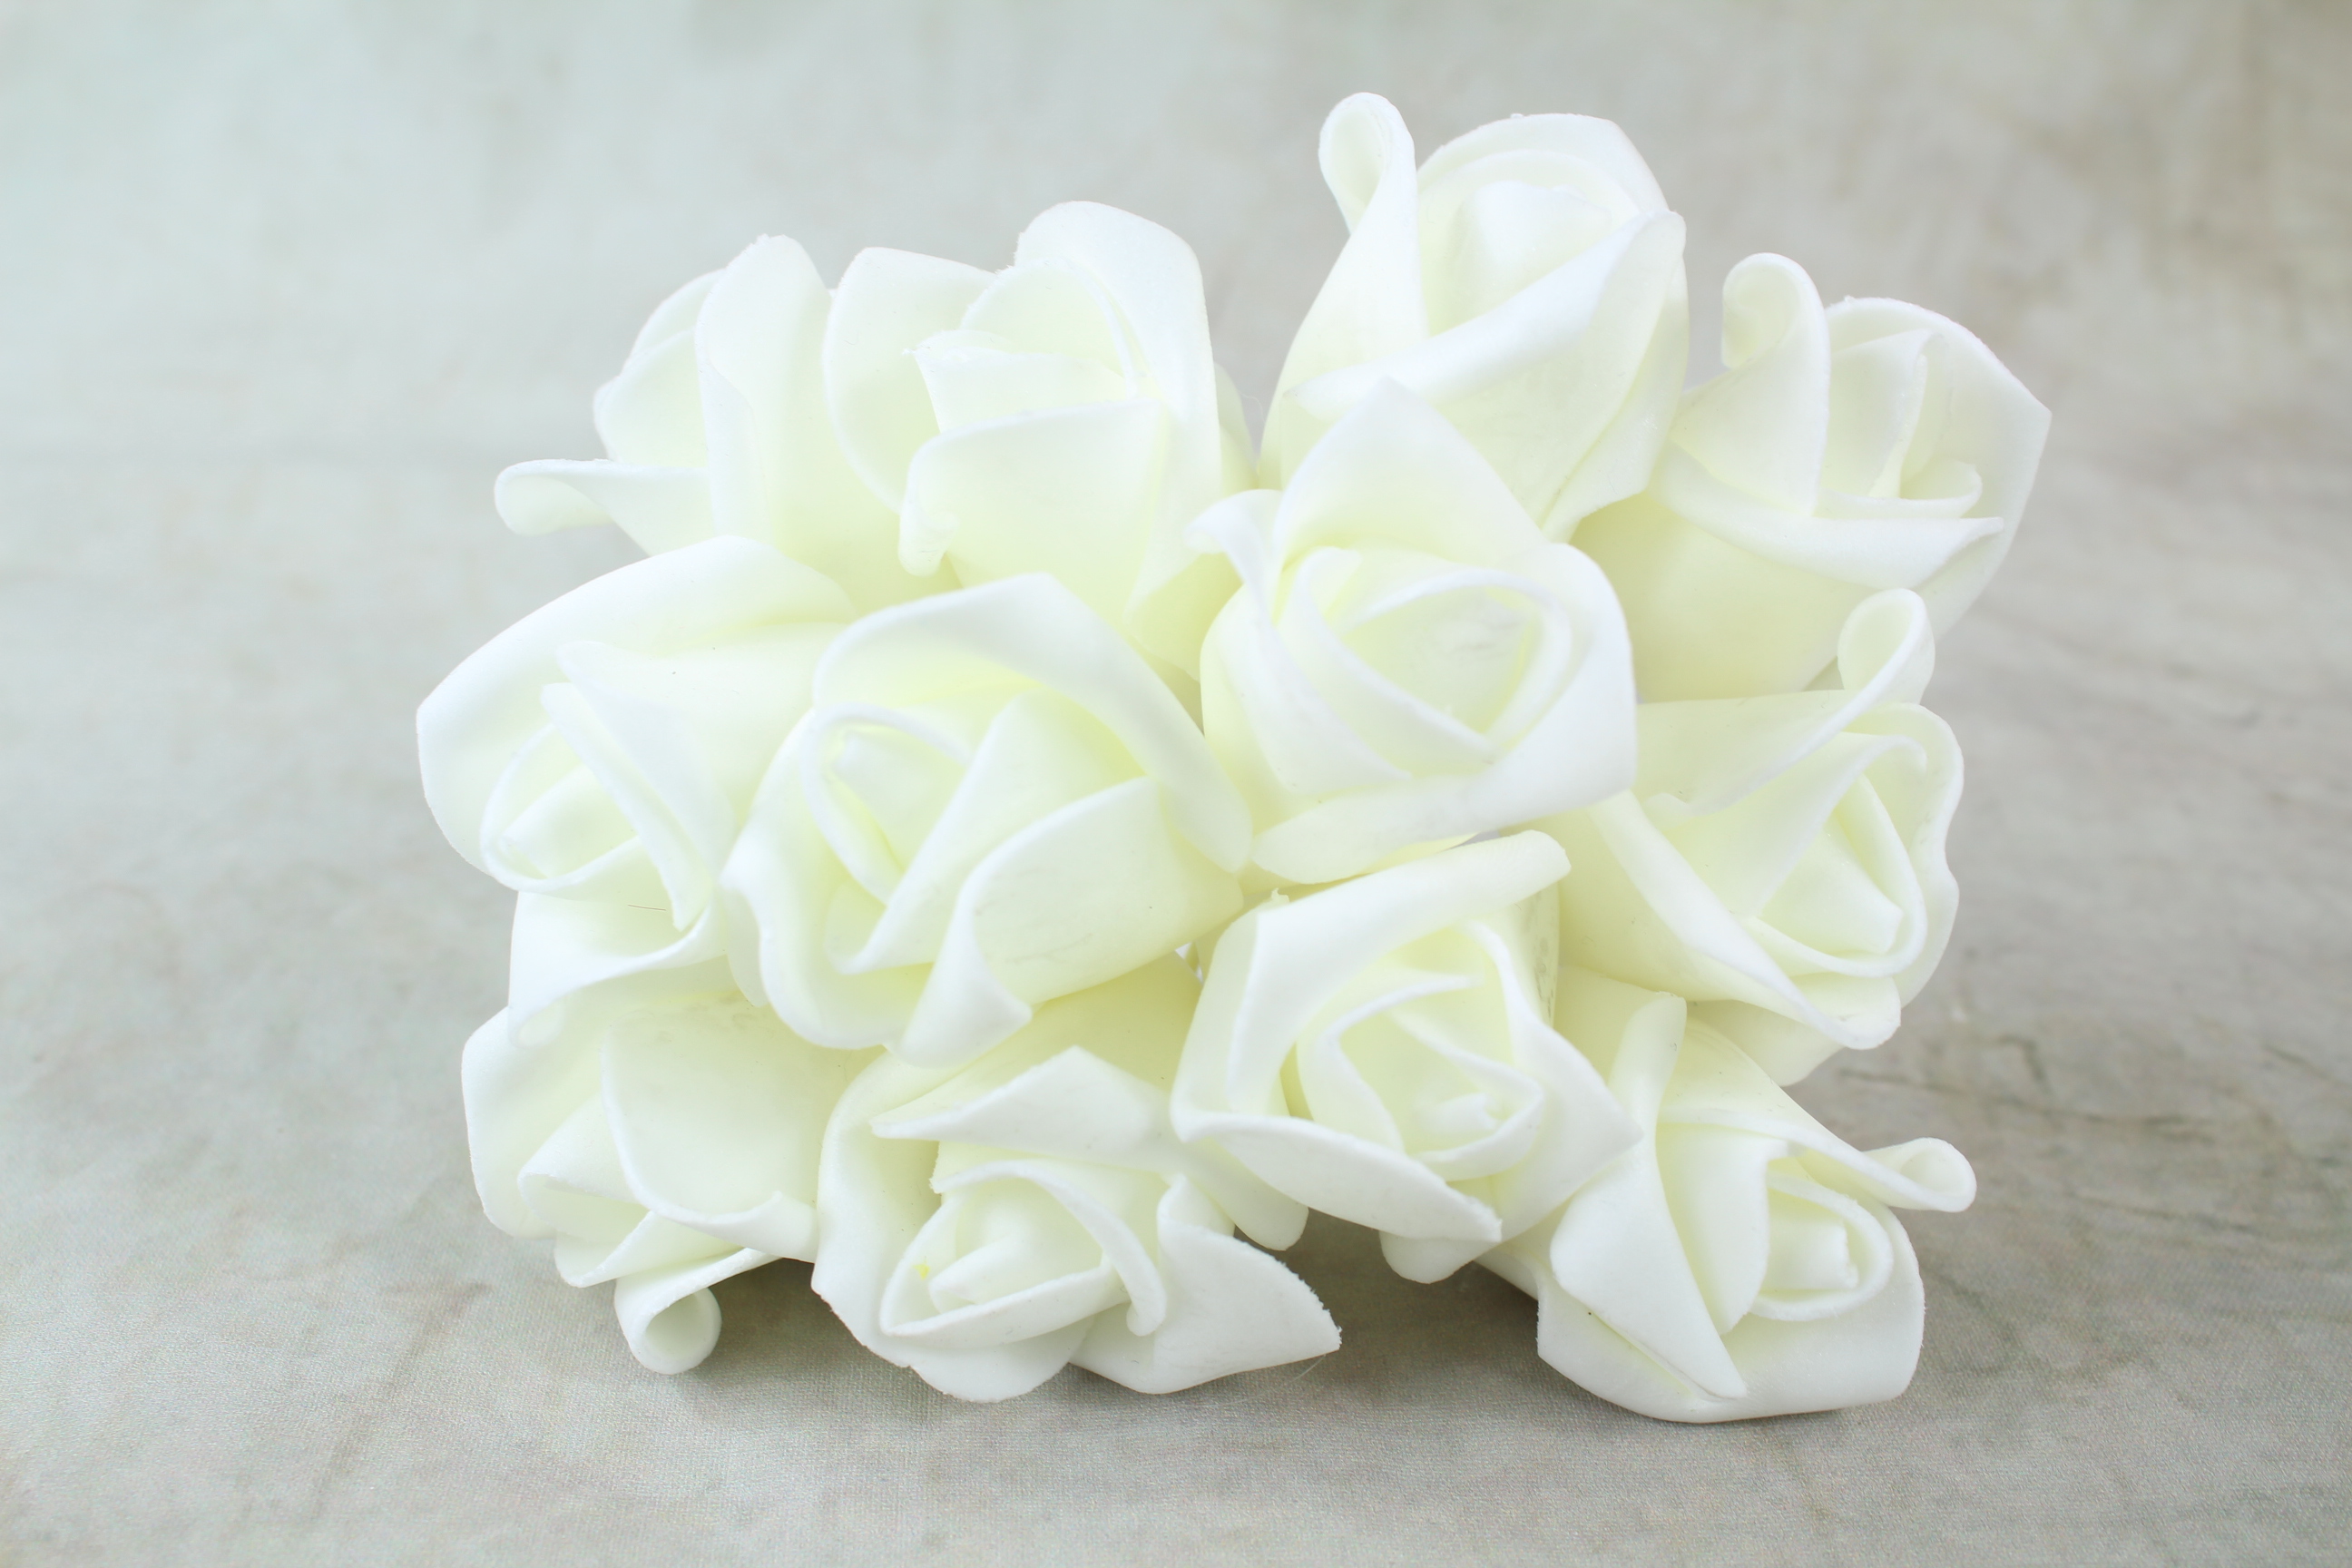 12 x Small Rolled Foam Roses 